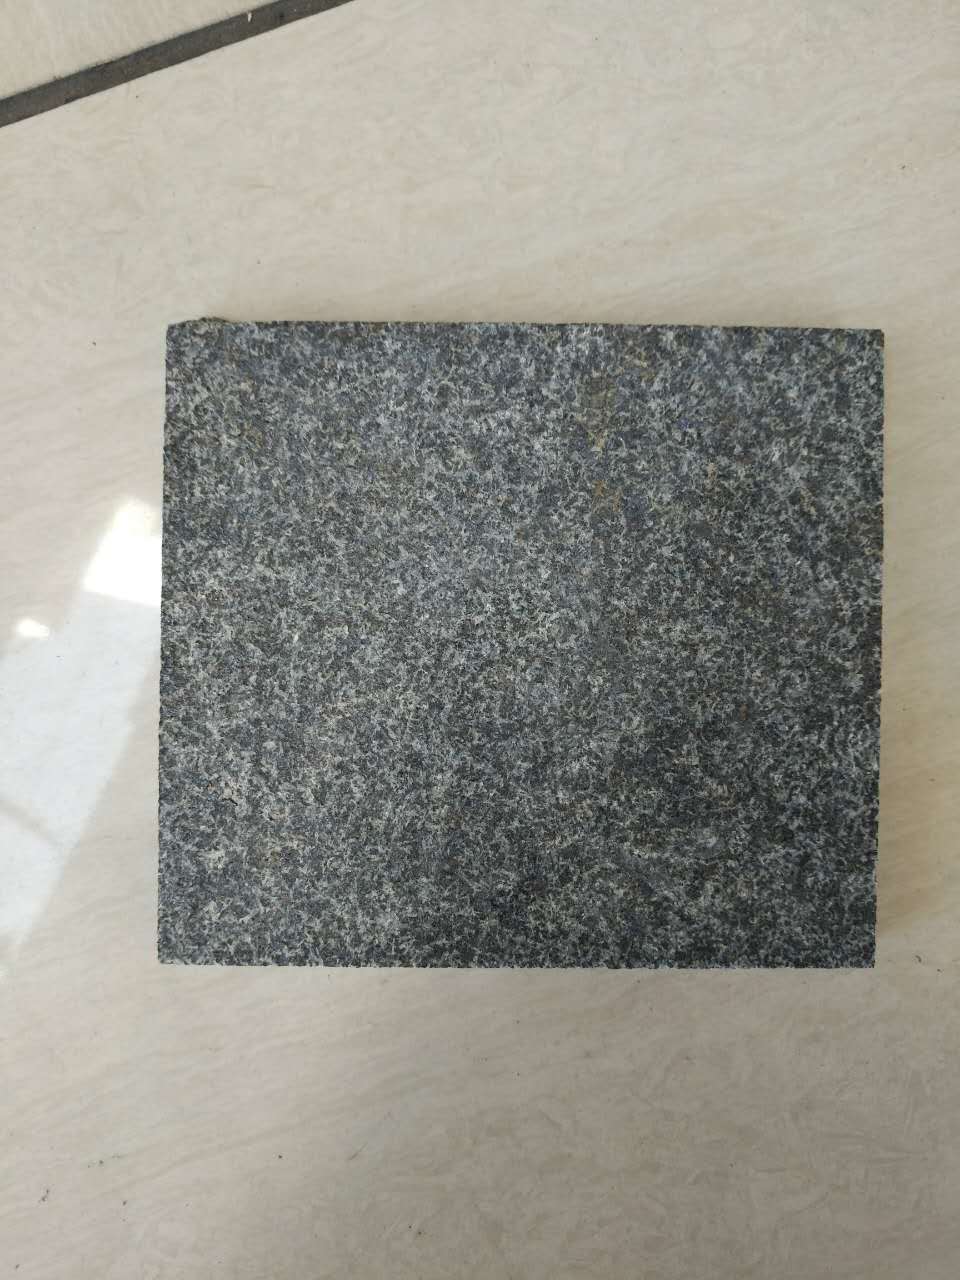 Chinese New Shanxi Black Granite Tiles with flamed surface